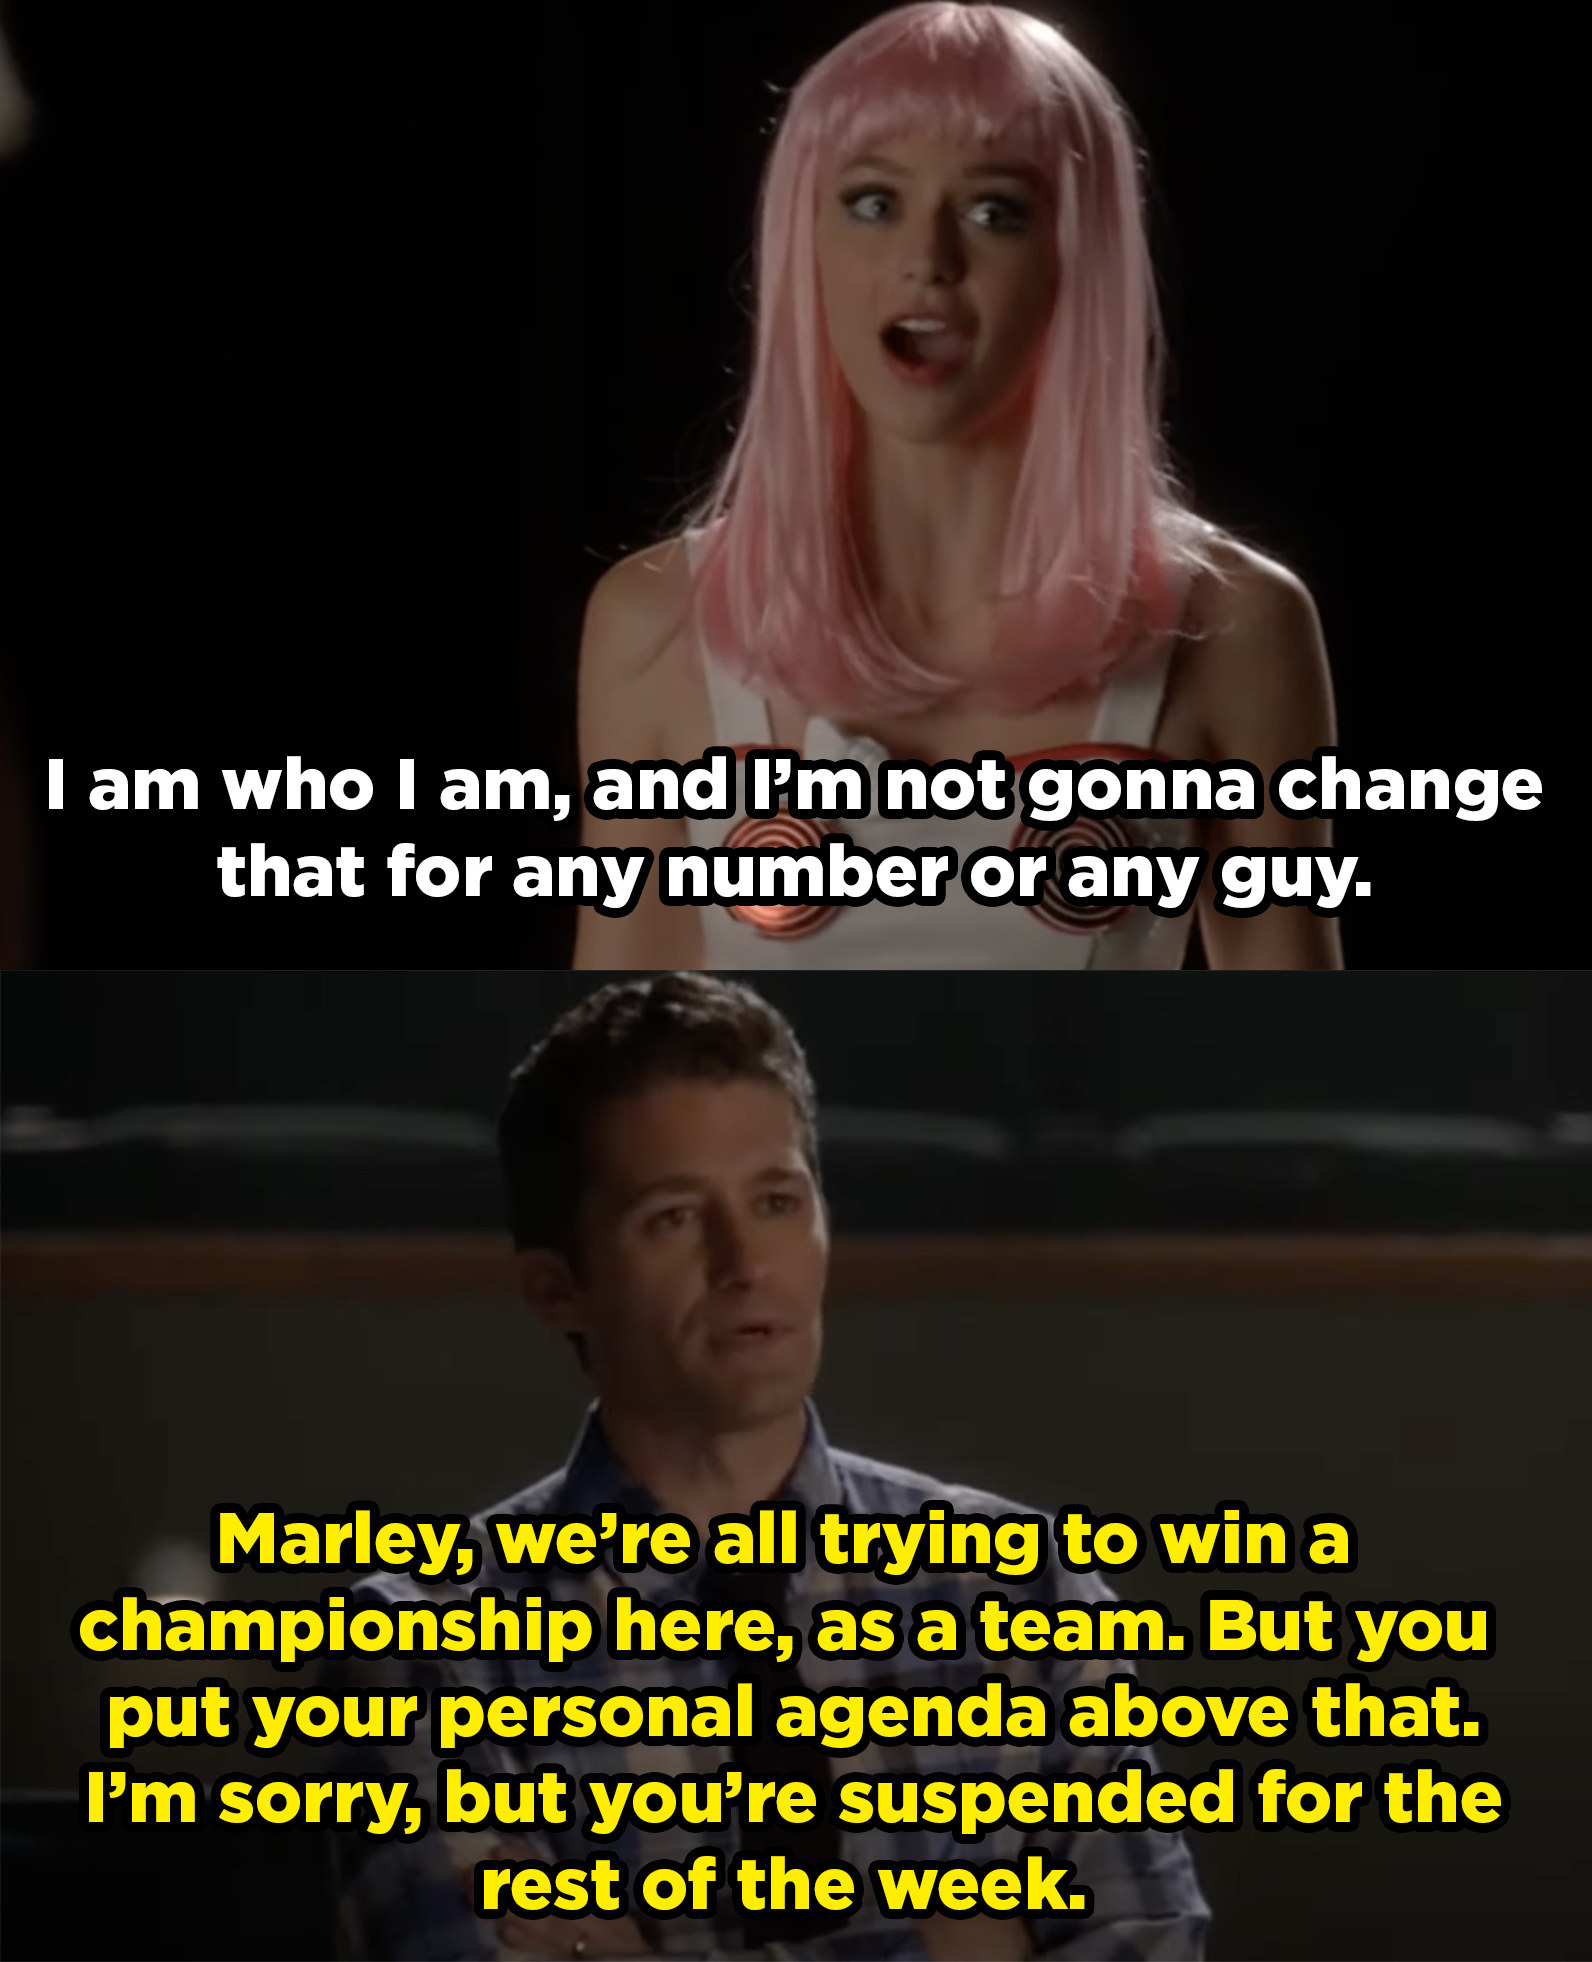 Marley says she is who she is and won&#x27;t change it for a number, then Mr. Schue tells her she put her personal agenda above the team and suspends her